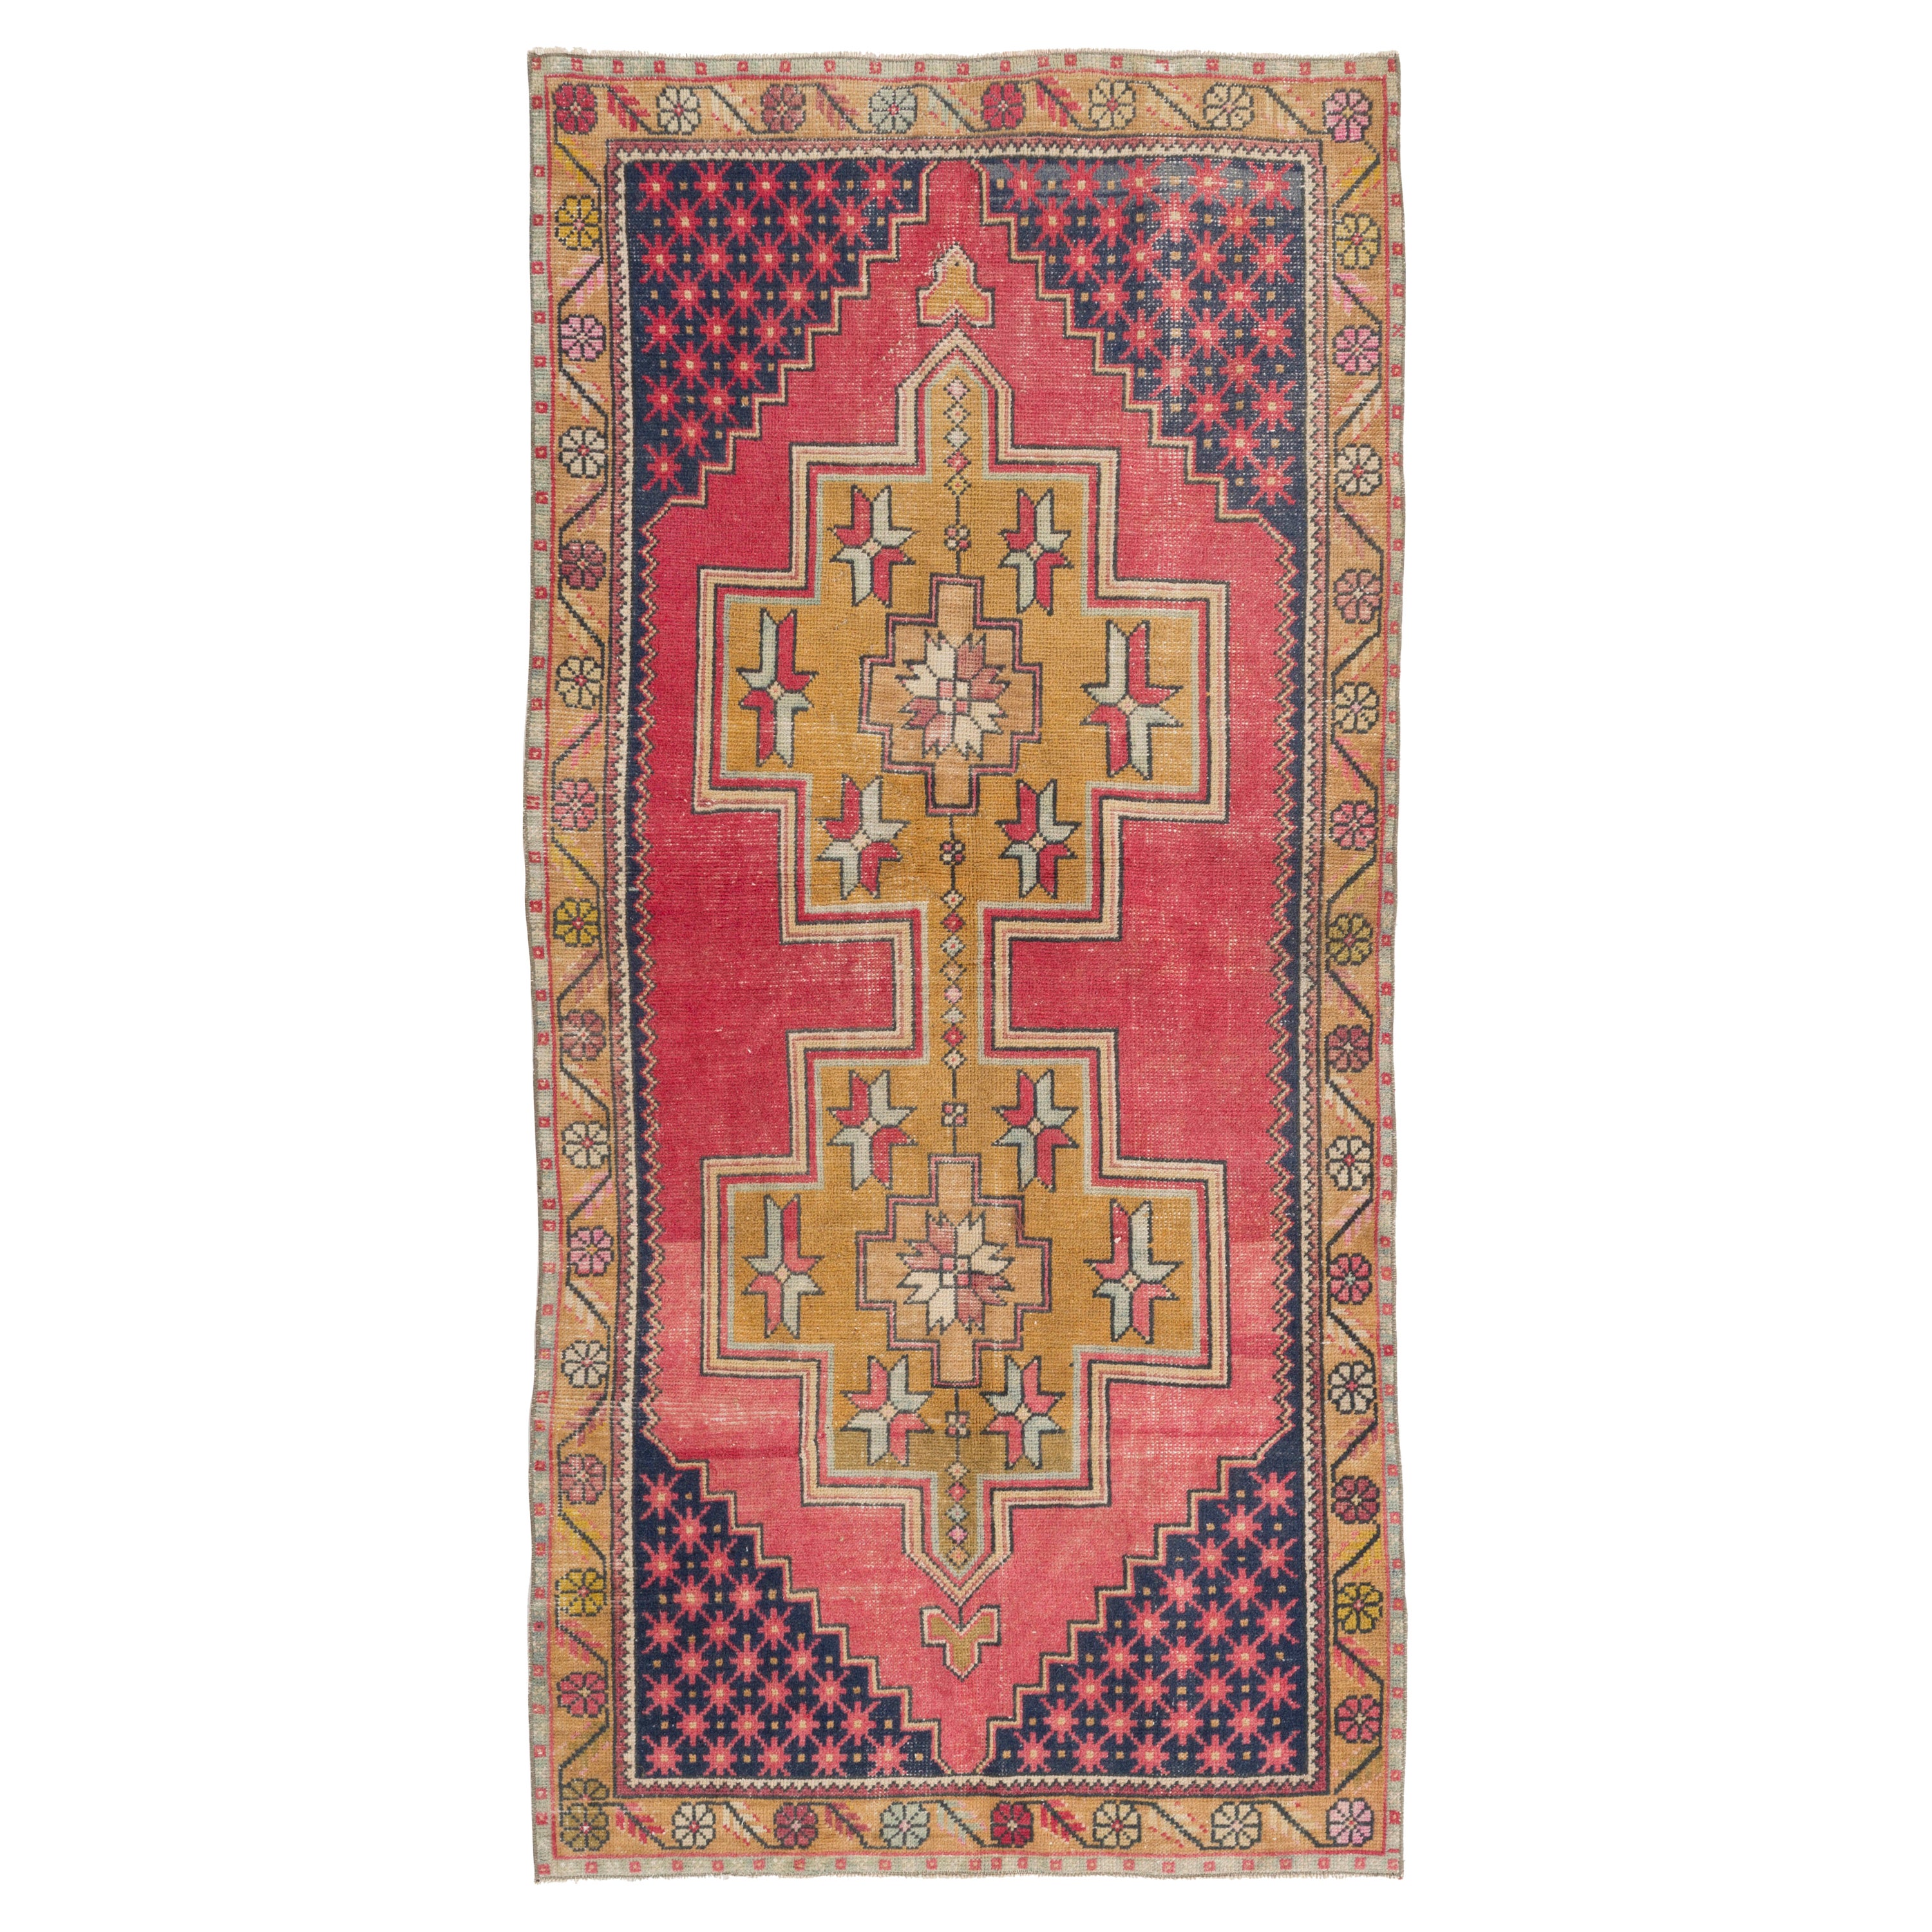 4.2x8.6 Ft Vintage Hand Knotted Turkish Rug with Wool Pile in Red and Gold For Sale